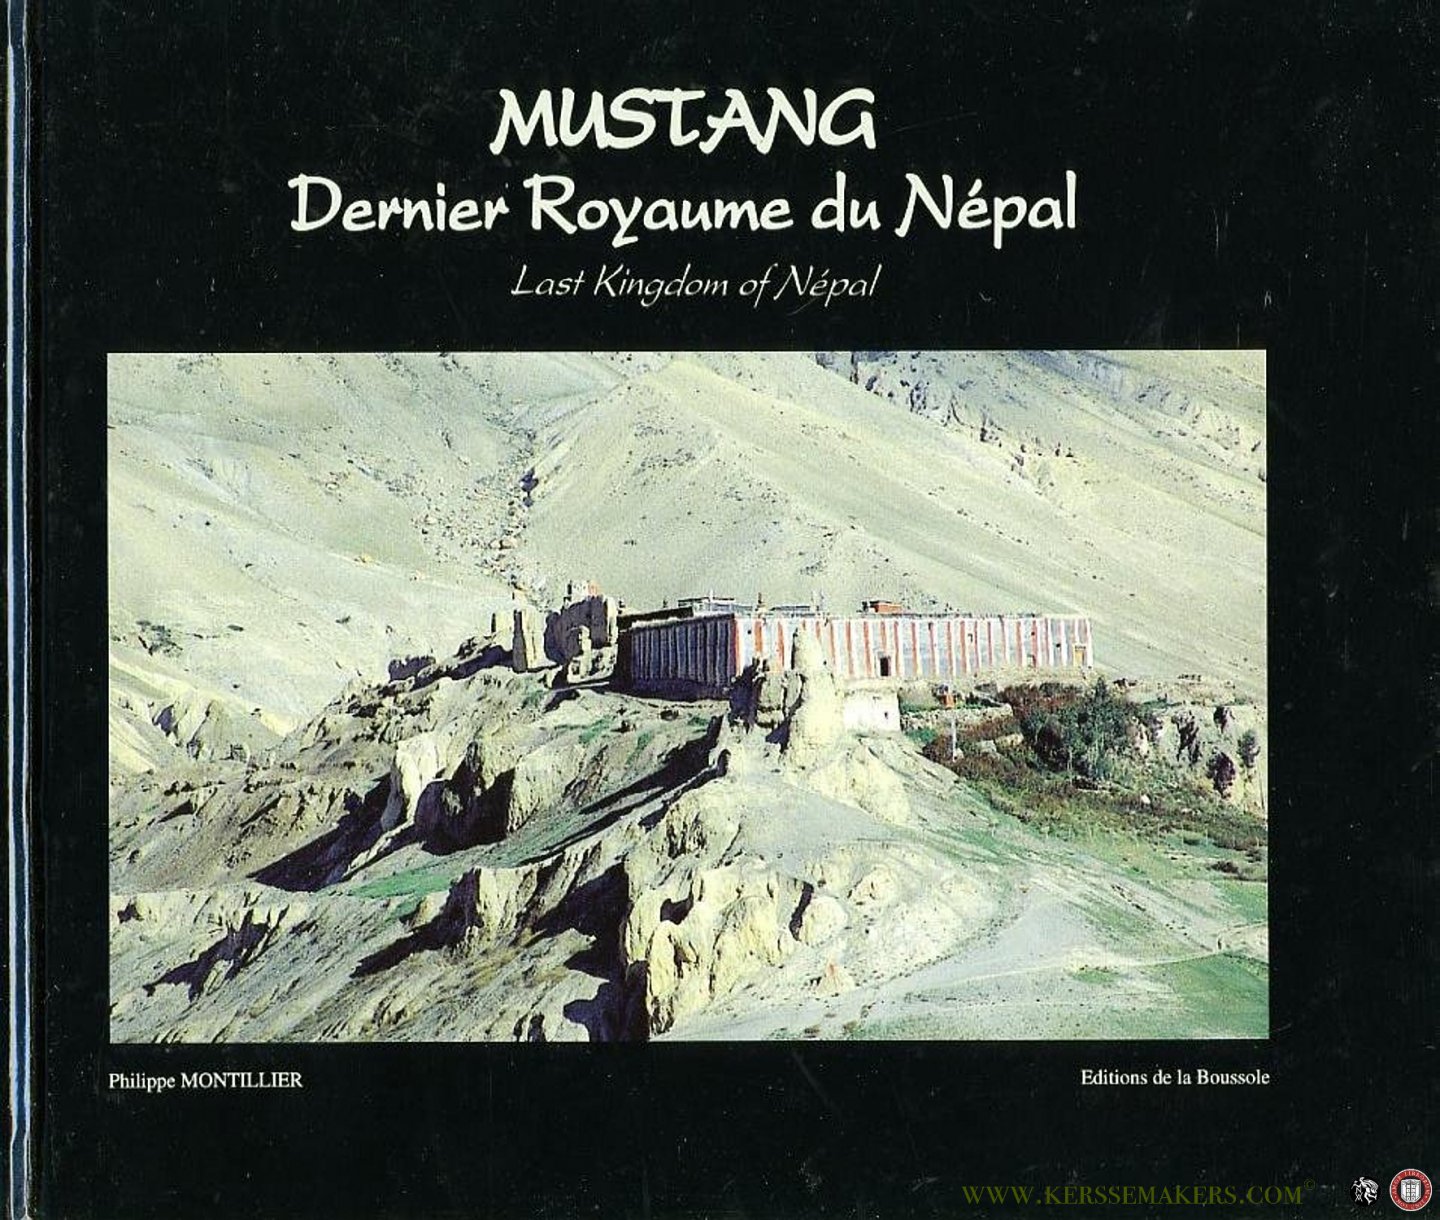 MONTILLIER, Philippe - Mustang. Dernier Royaume du Népal - Last Kingdom of Népal (Text in French and English)